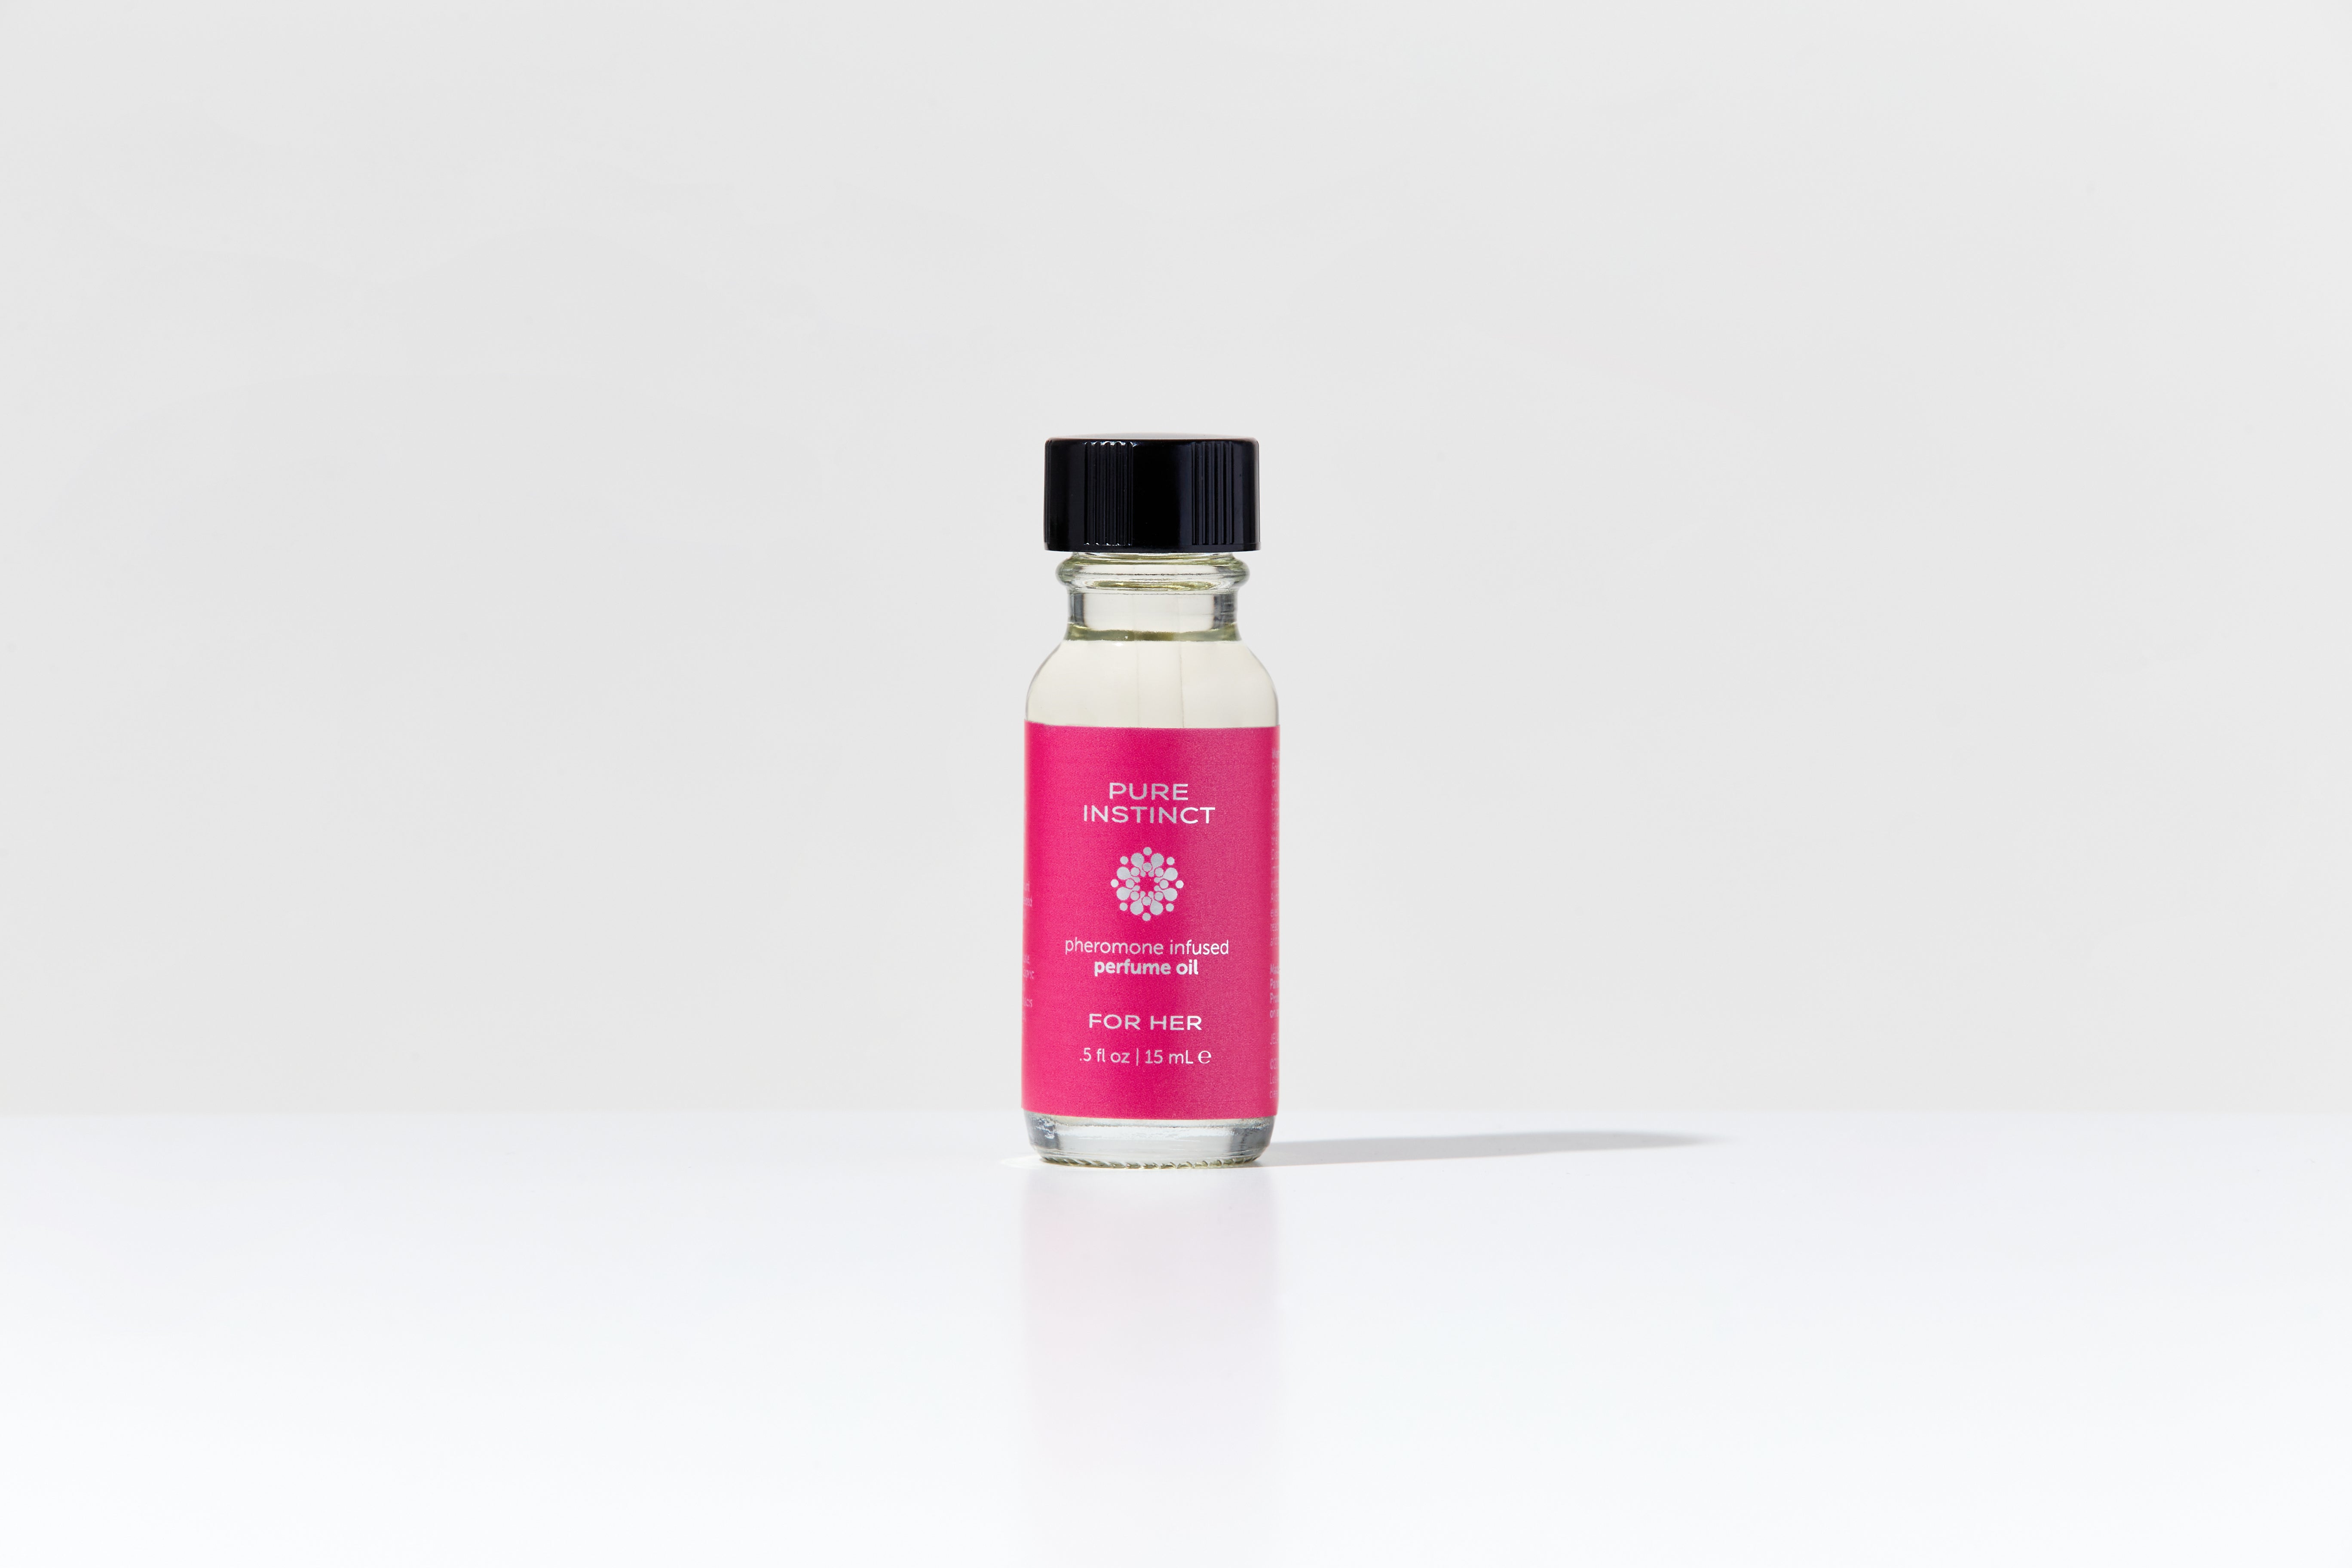 For Her Pheromone Infused Essential Perfume Oil